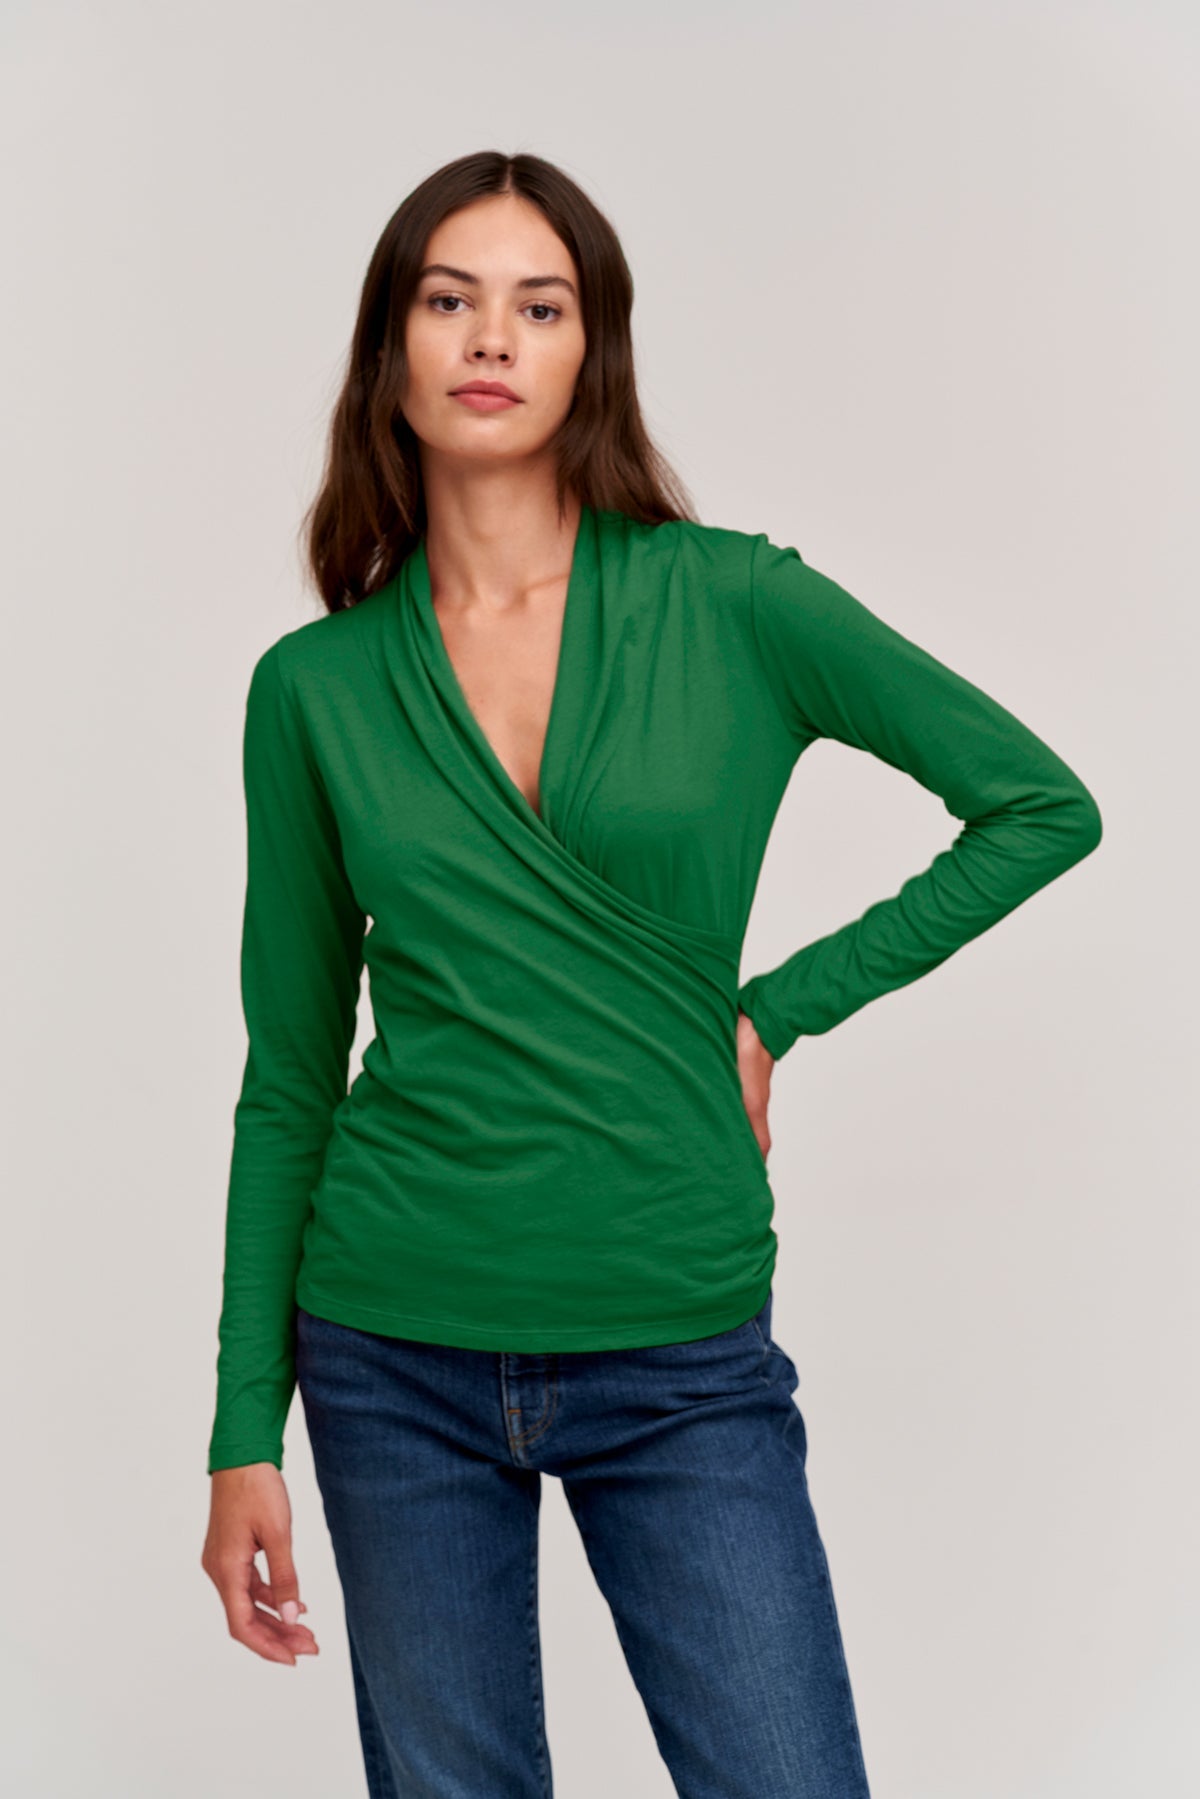 A woman wearing a Velvet by Graham & Spencer MERI Wrap Front Fitted Top and jeans.-26630826590401